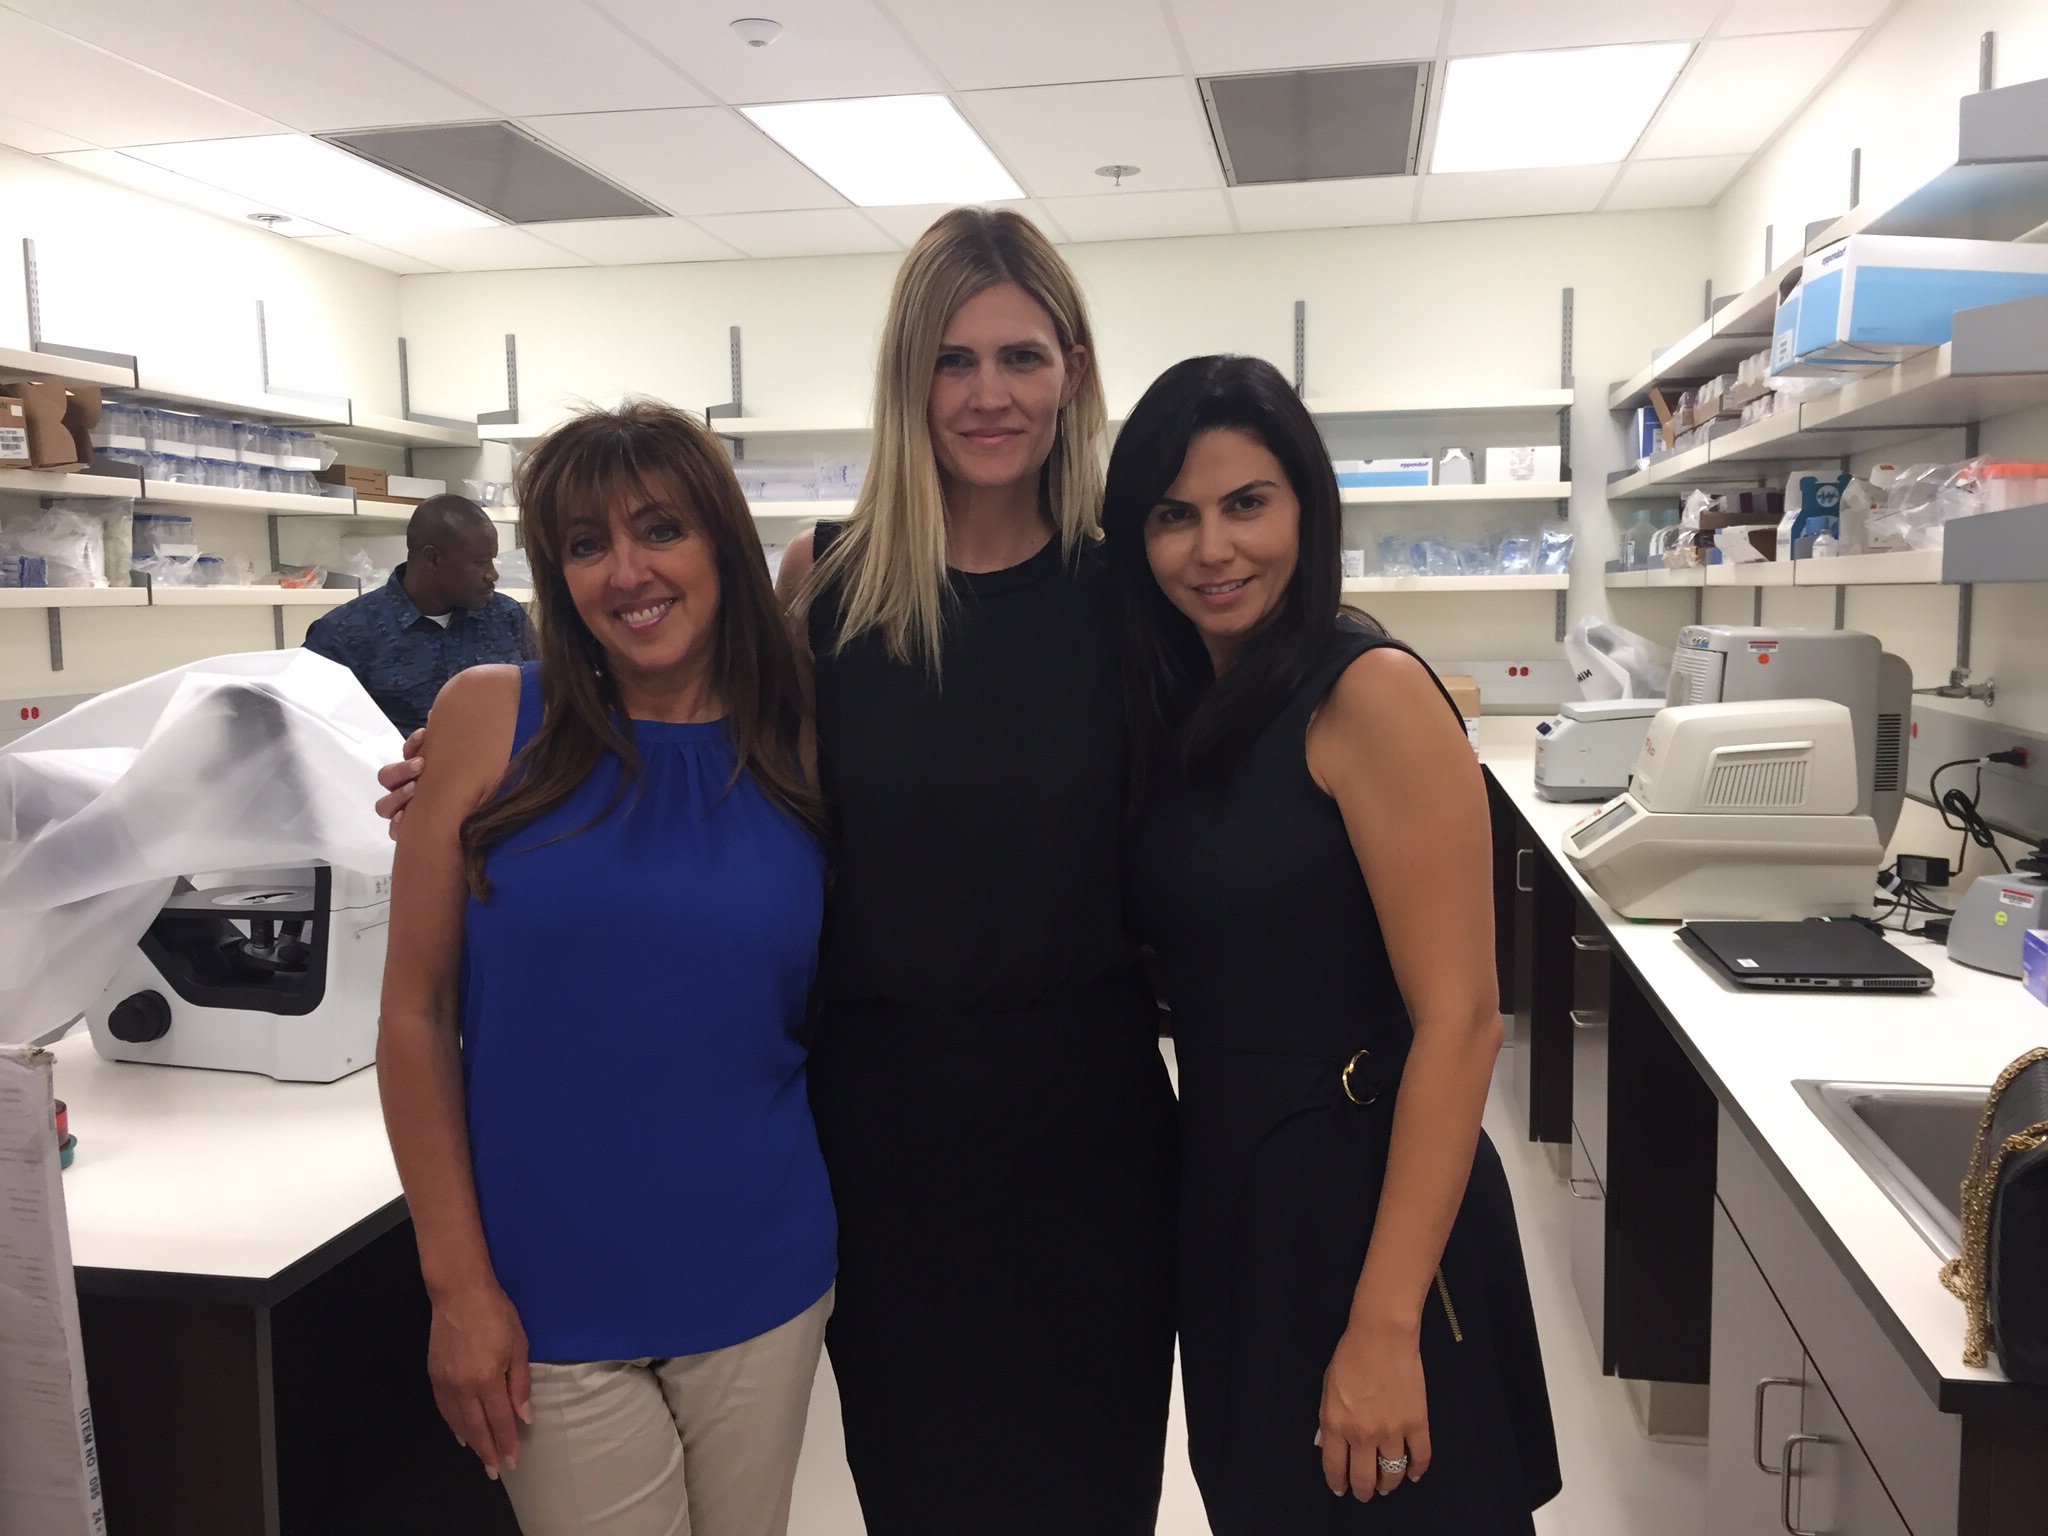 Schubach Aviation's Jolane Crawfor and Kimberly Herrell with Immunotherapy Co-Founder Fernanda Whitworth.